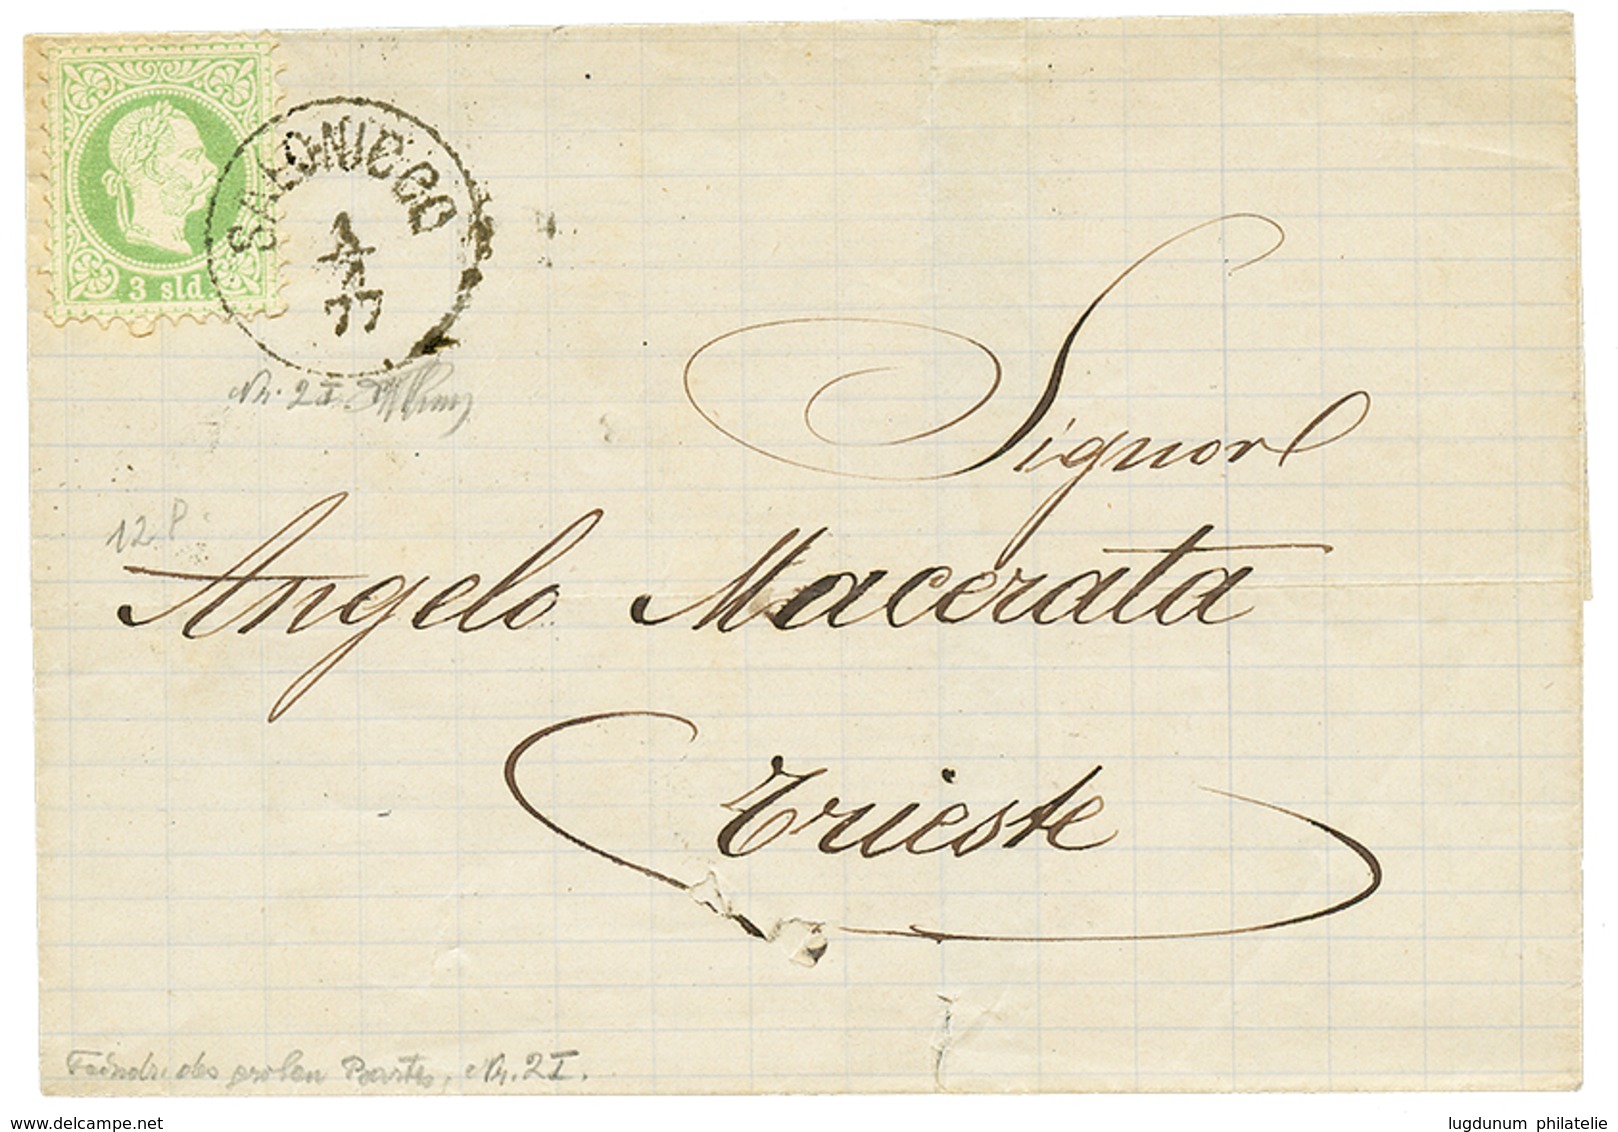 975 1877 3 Soldi(n°2I) Canc. SALONICCO On Cover To TRIESTE. Rare Printed-matter Rate. Superb. - Eastern Austria